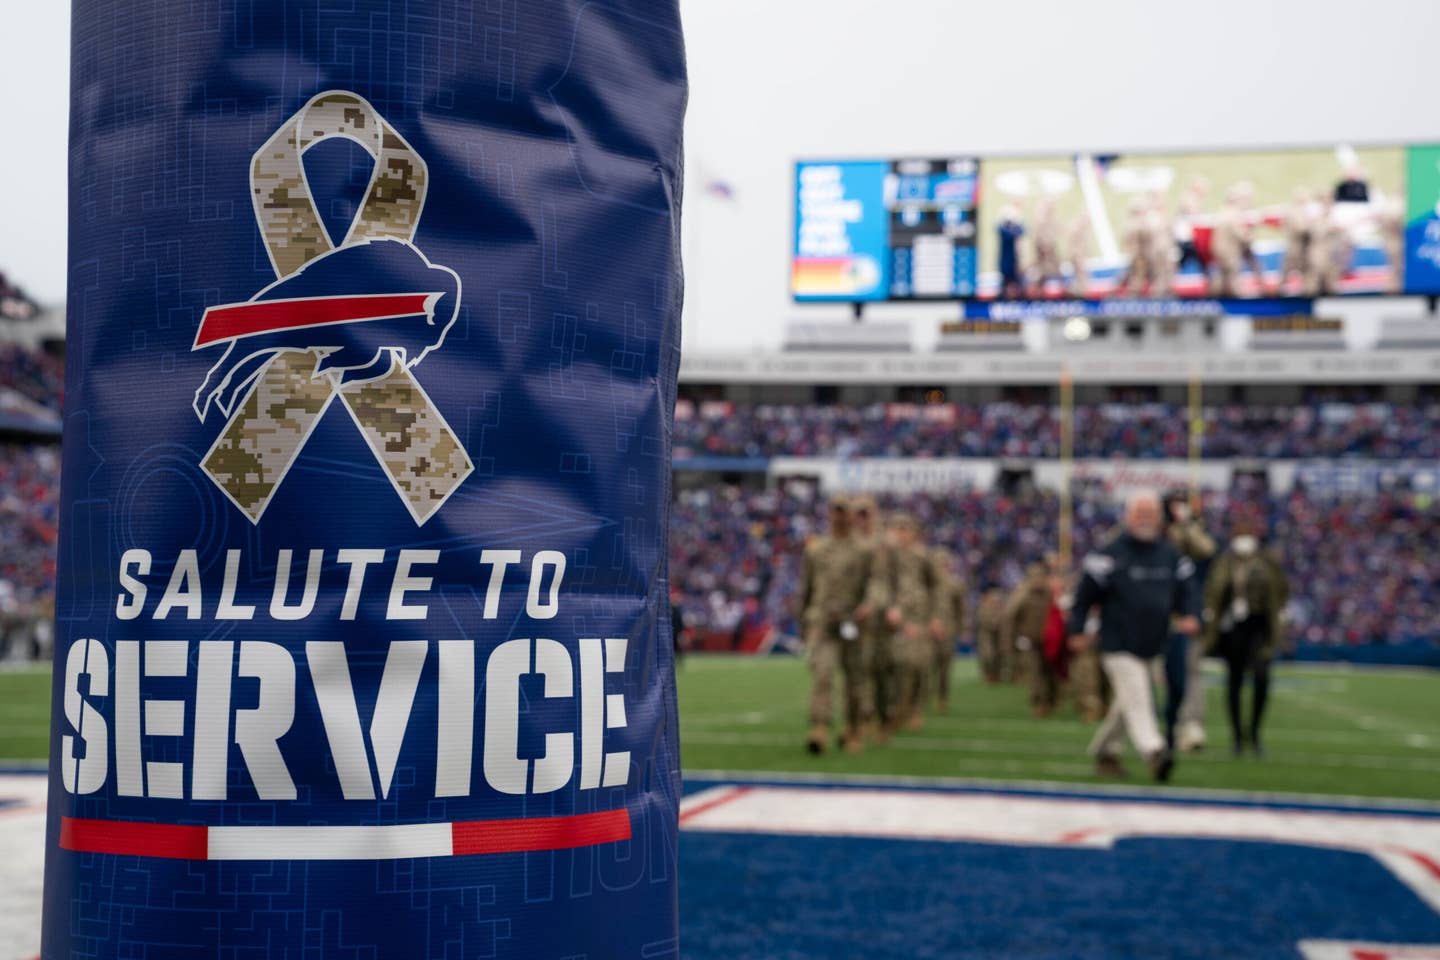 NFL Salute to Service logo on football goal post.